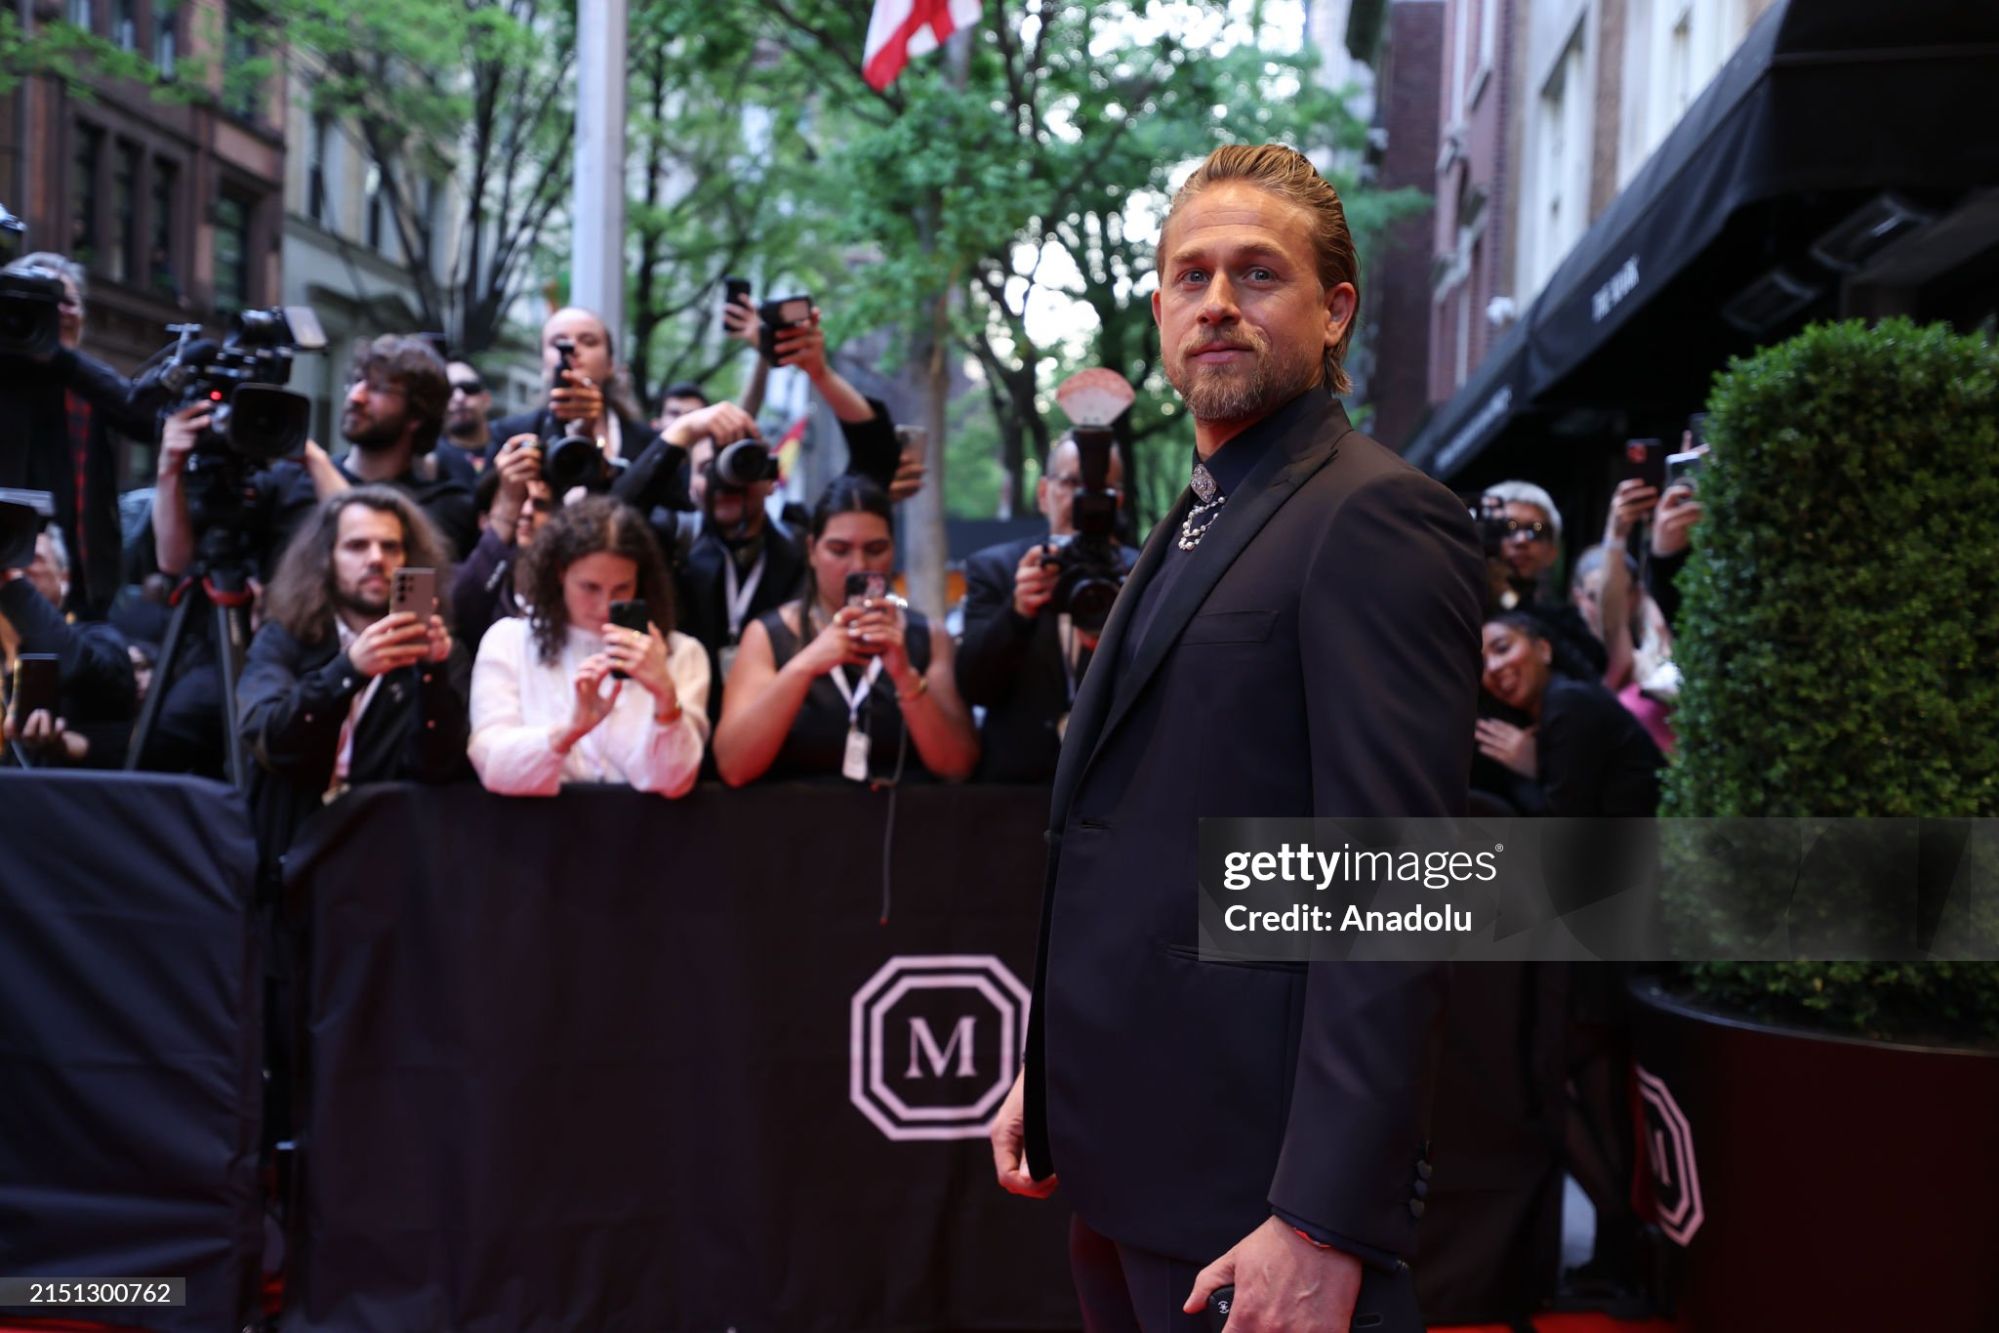 gettyimages-2151300762-2048x2048.jpg